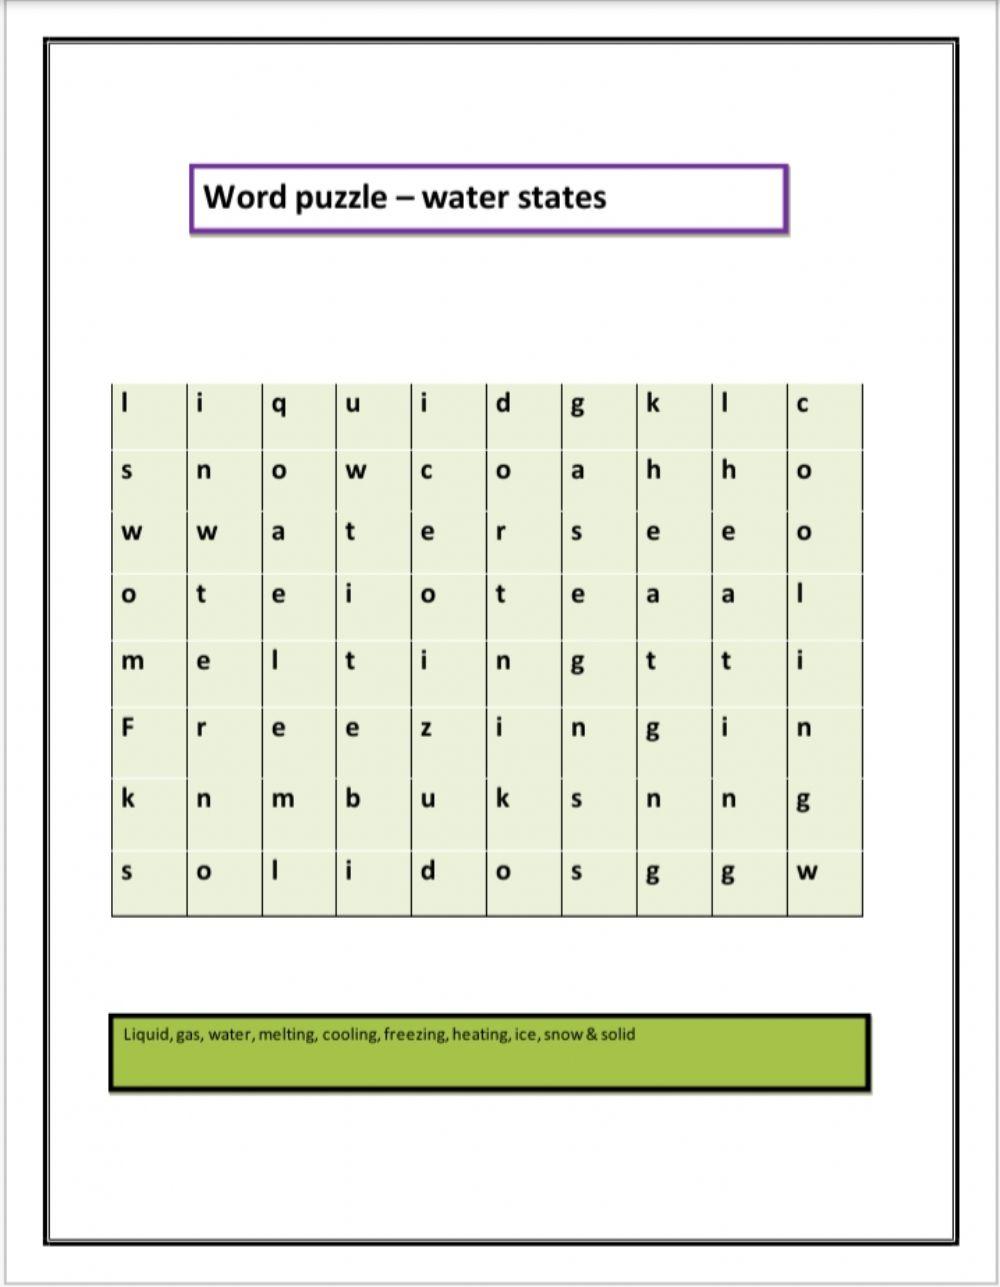 Word puzzle water states